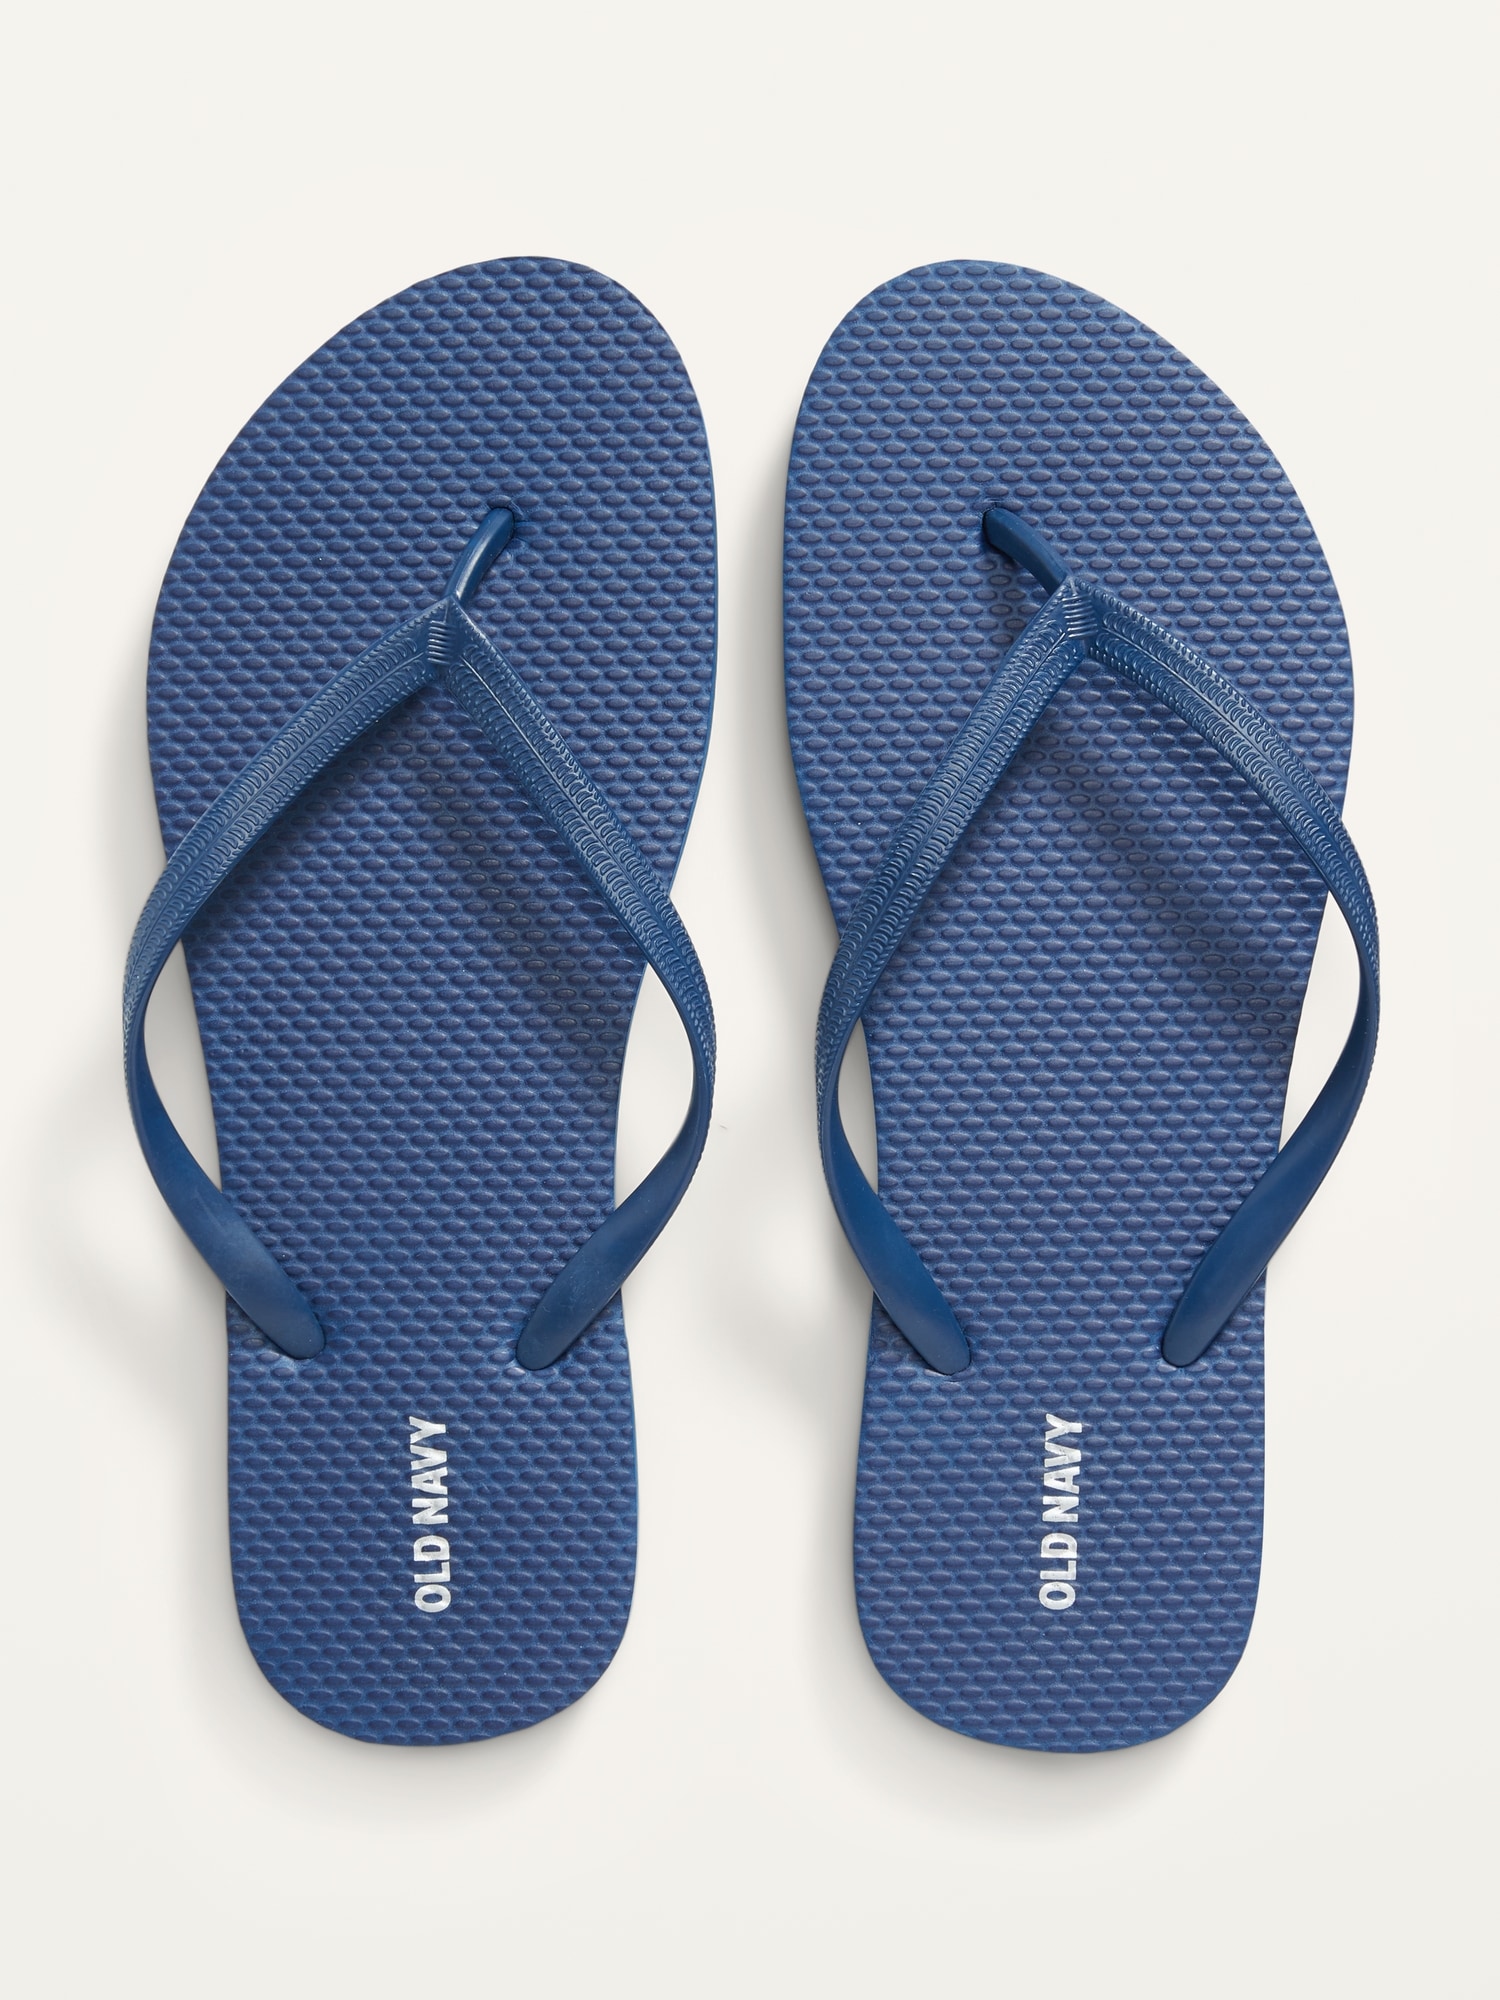 Flip-Flop Sandals for Women (Partially Plant-Based) | Old Navy